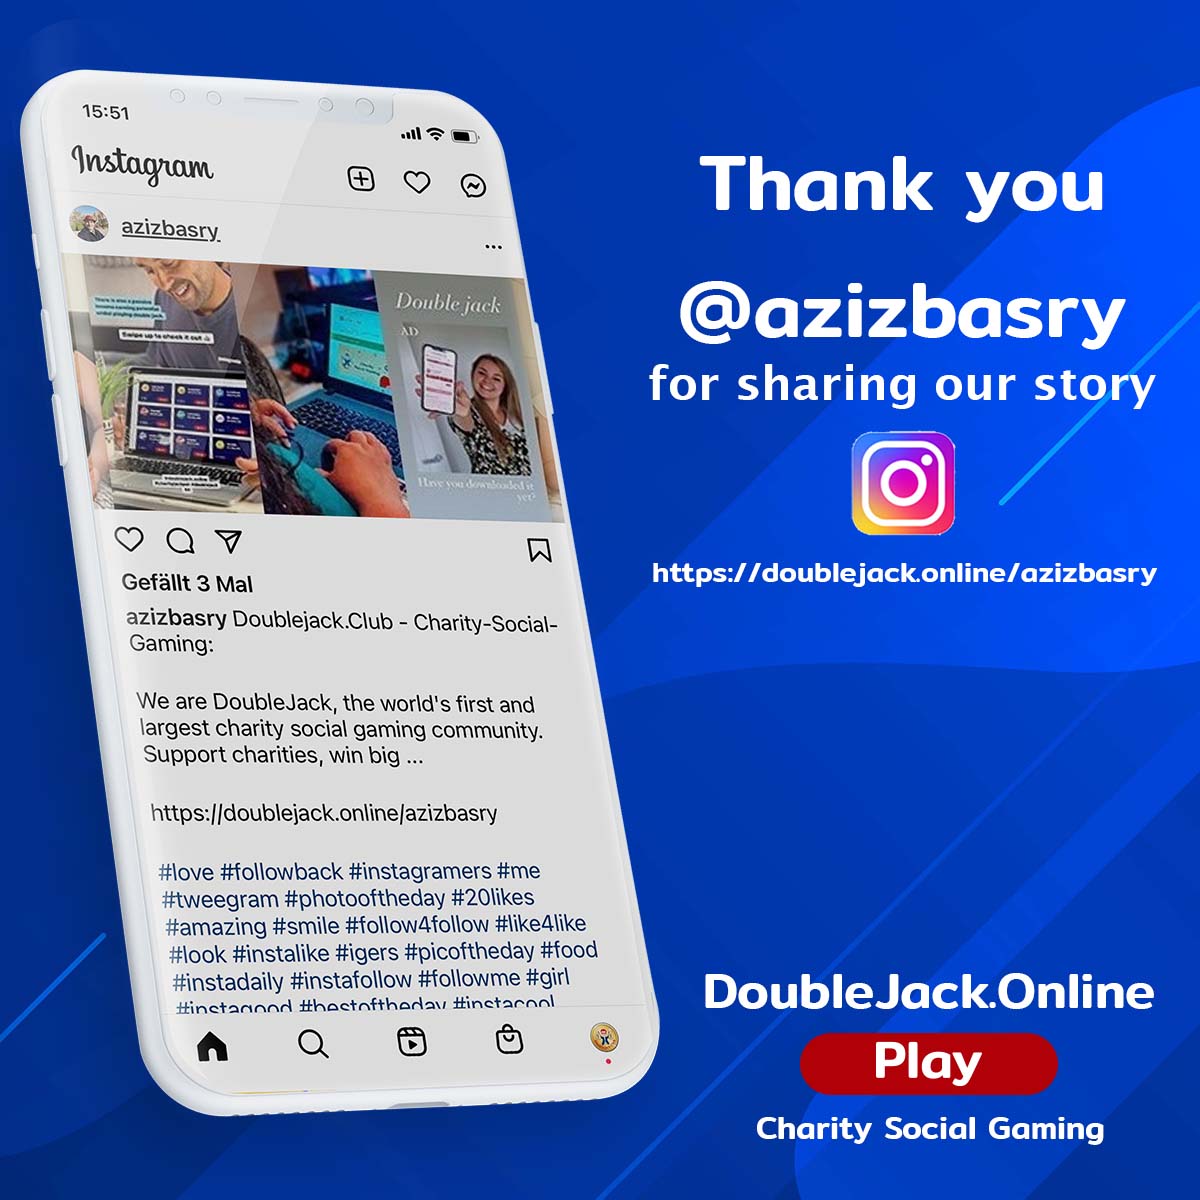 Instagramer @azizbasry is sharing the story of DoubleJack.Online. Thank you for that.